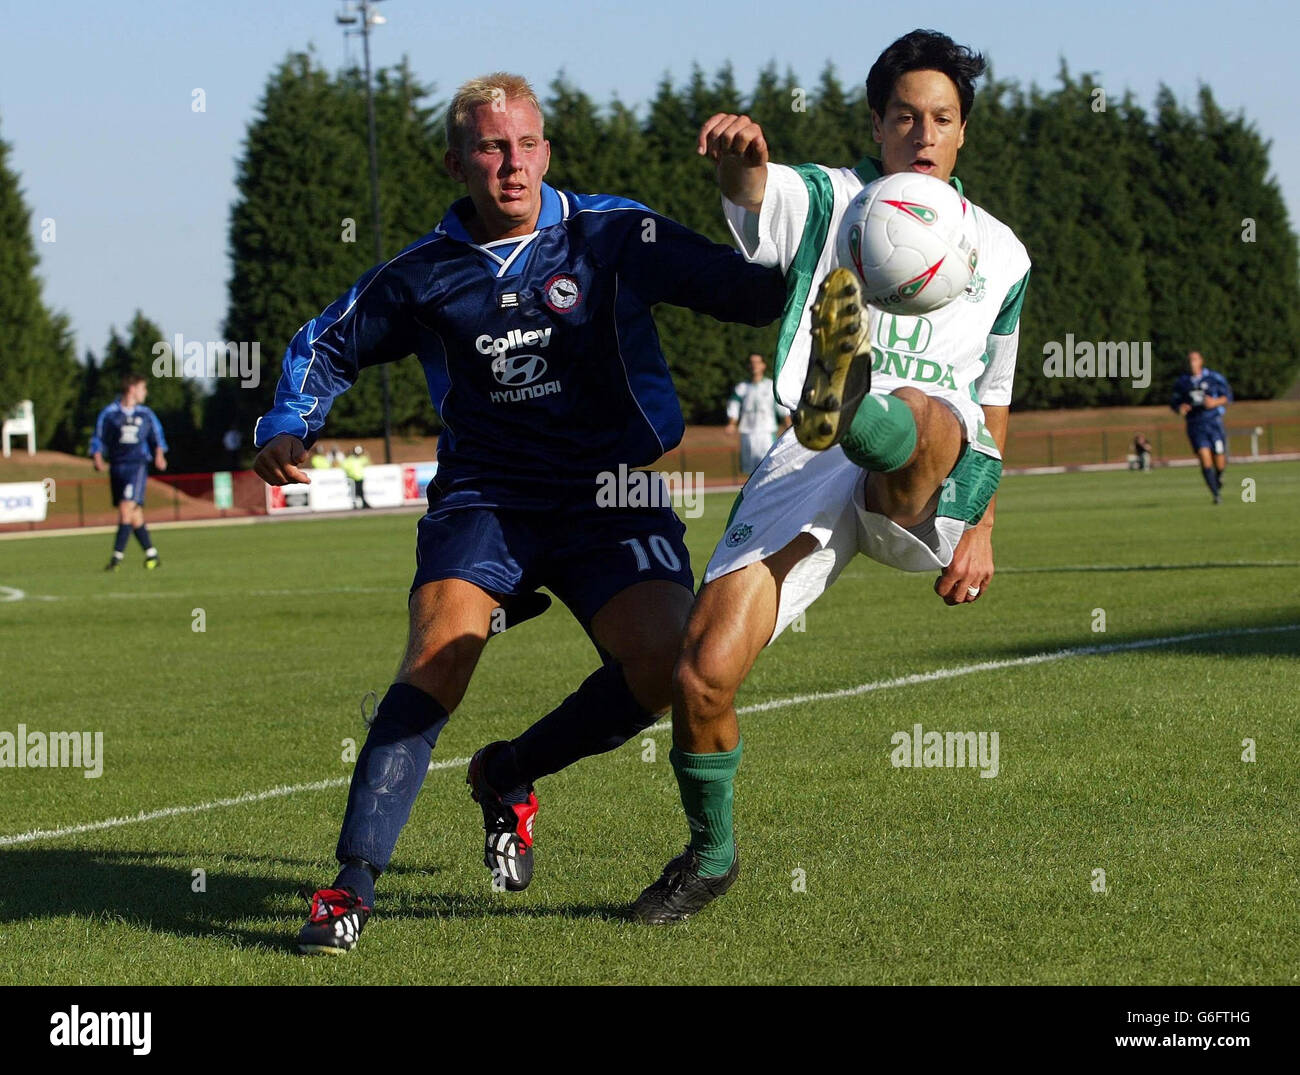 Idan Tal of Maccabi Haifa is under pressure from Kevin Wallace of Cwmbran Town during the UEFA Cup Prelimary round match at Cwmbran Stadium. Stock Photo